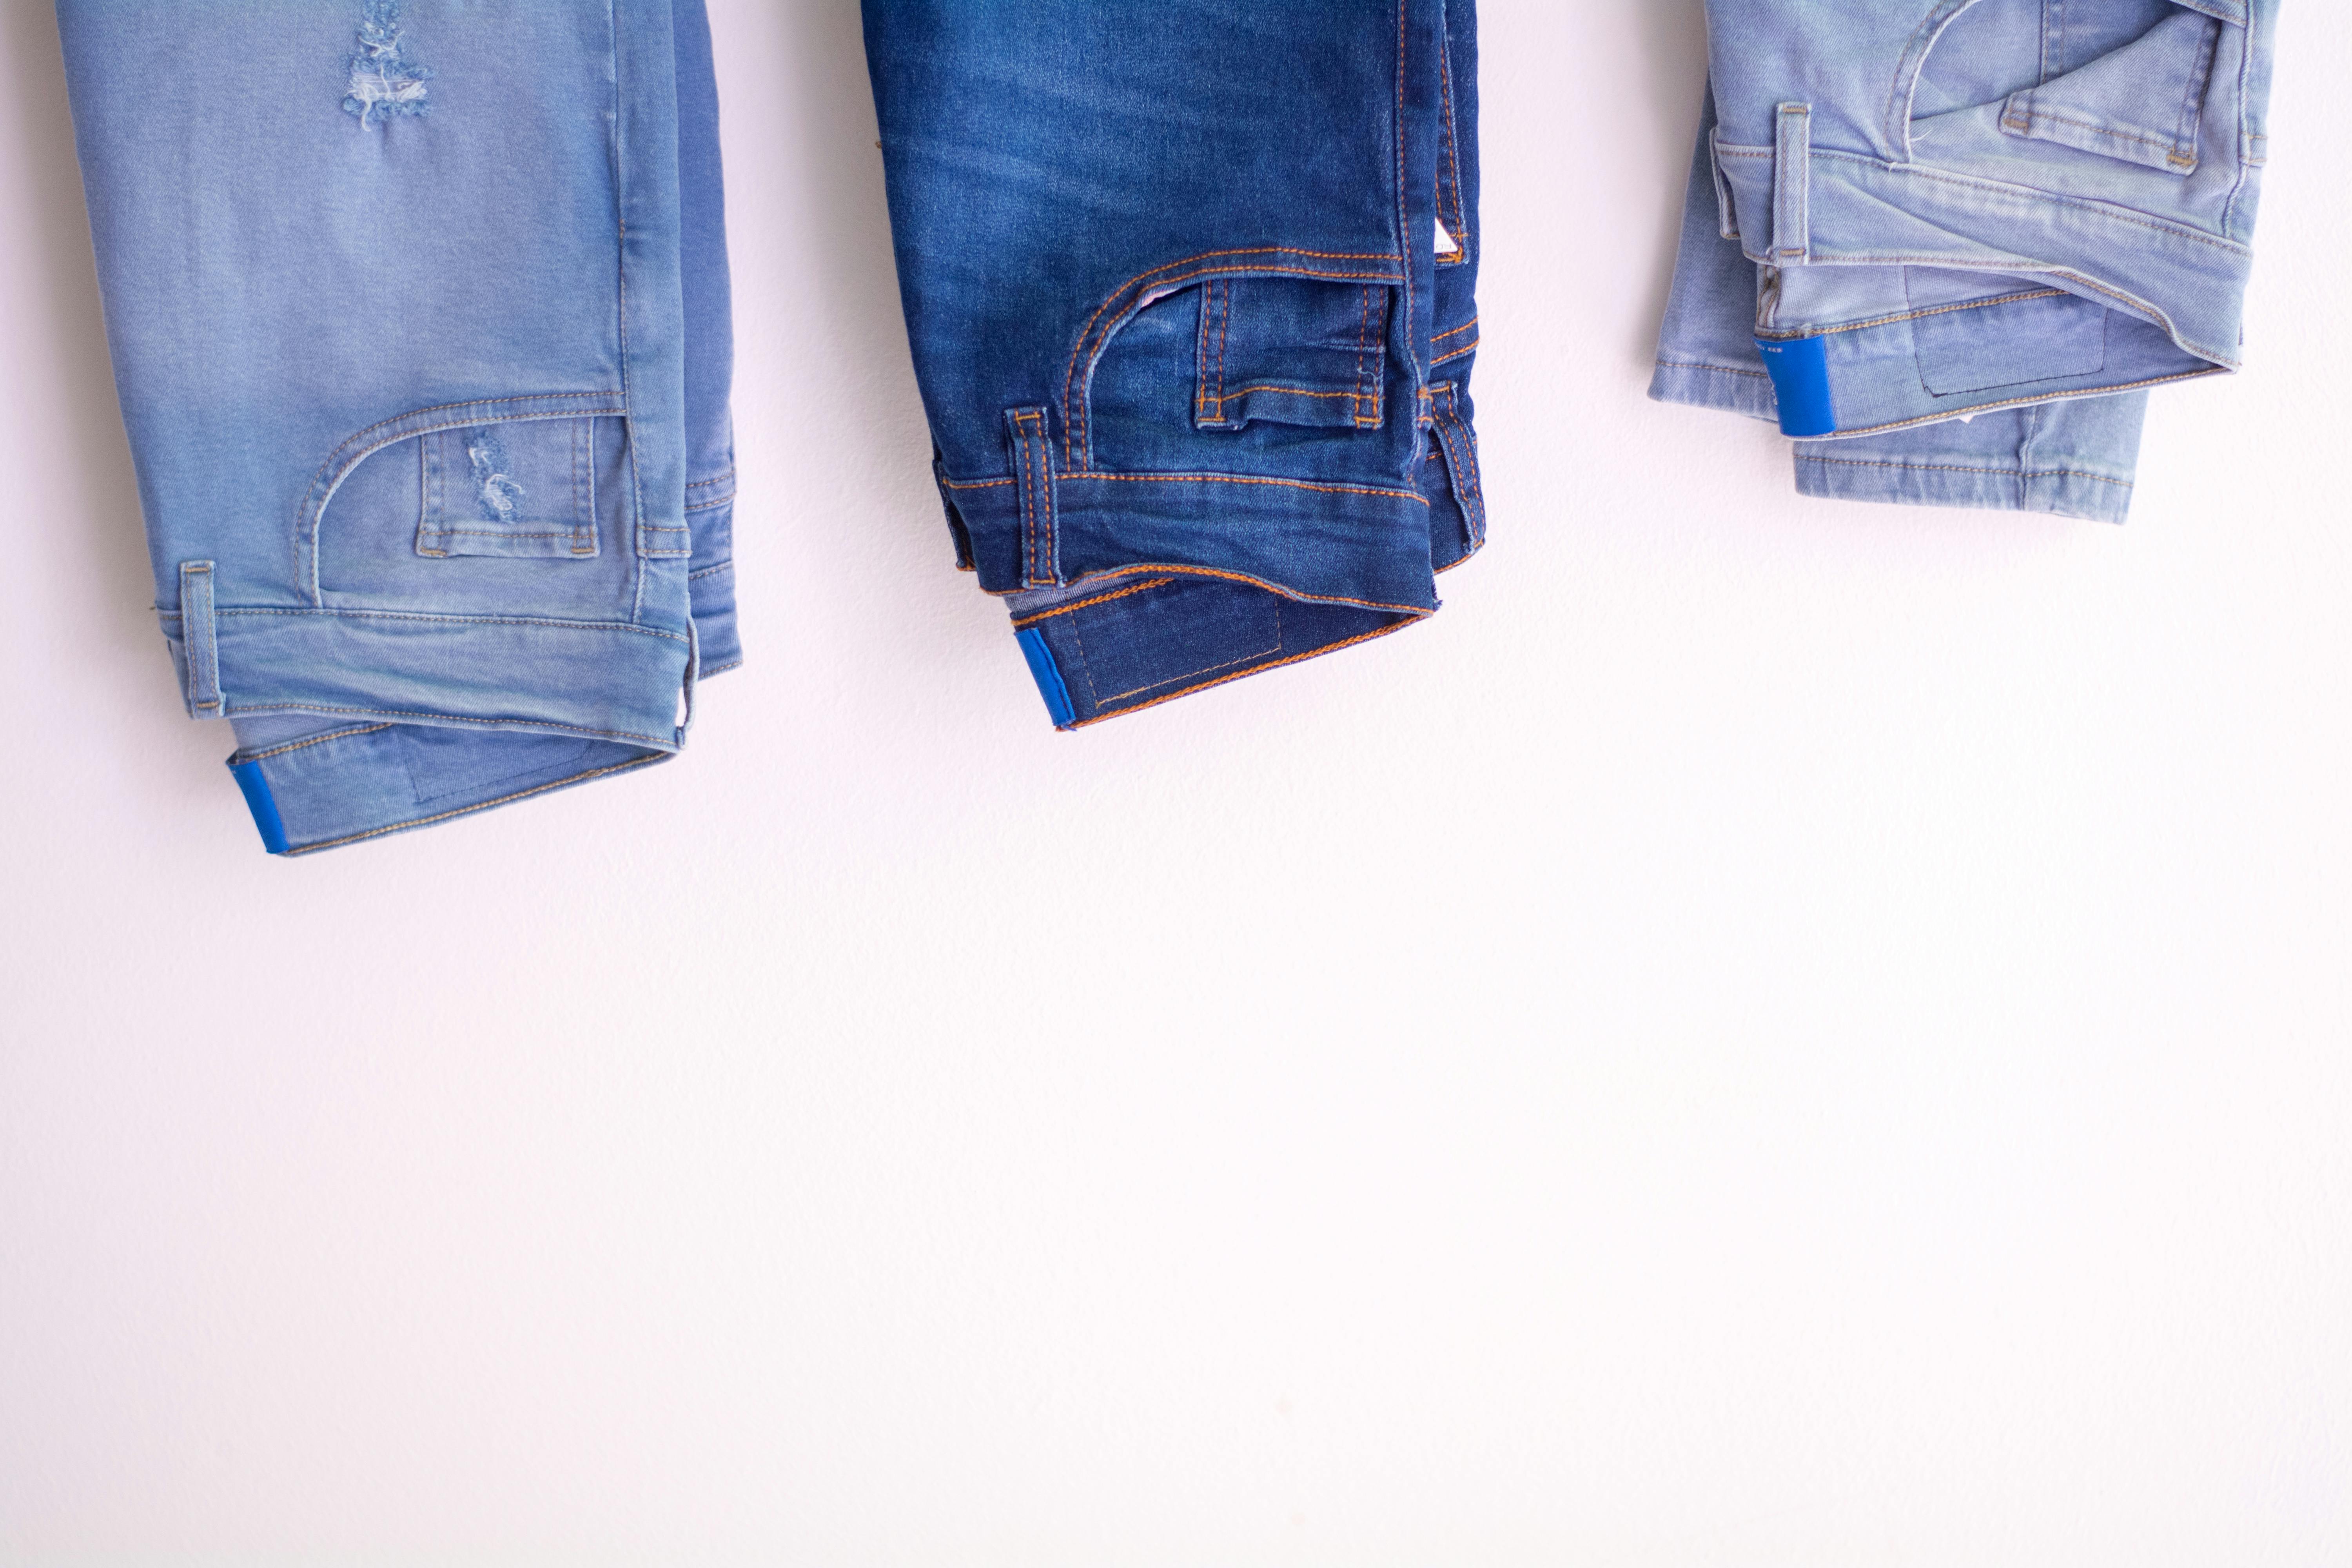 Blue Jeans Photos, Download The BEST Free Blue Jeans Stock Photos